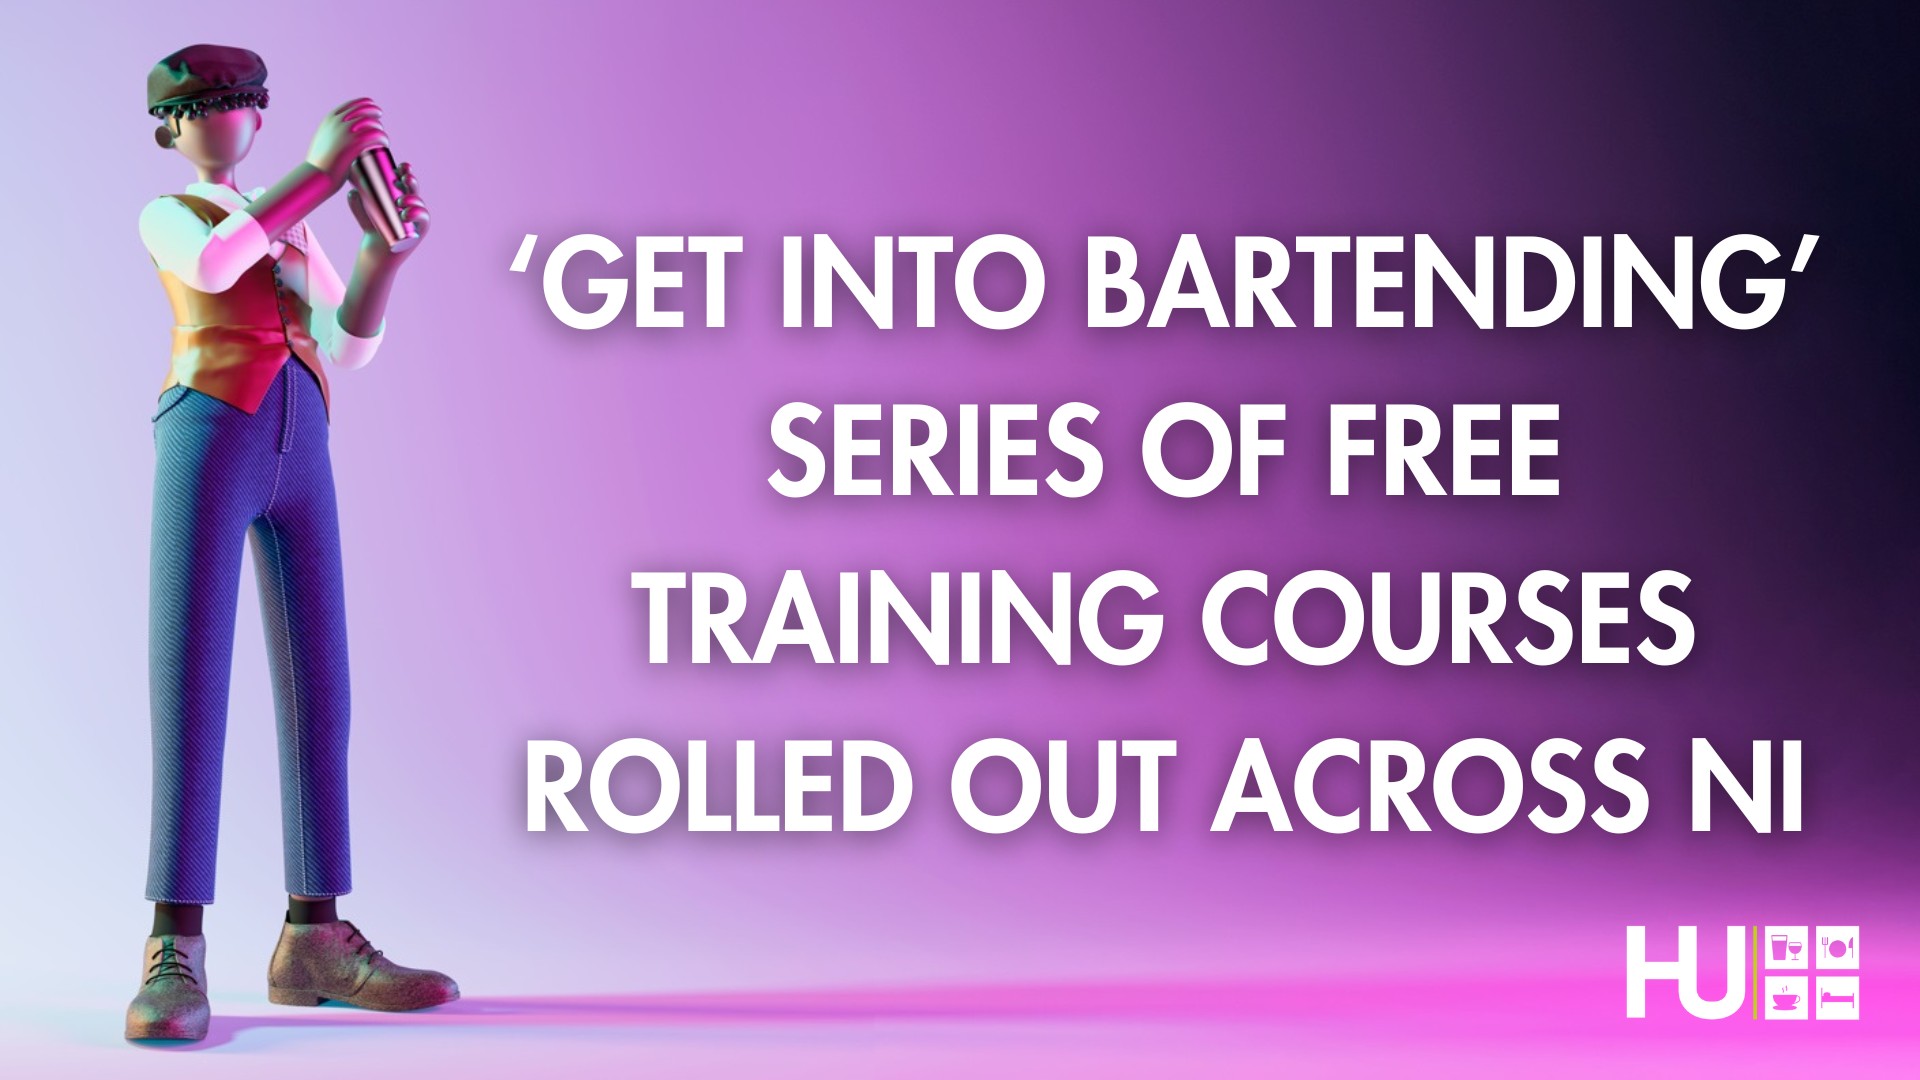 GET INTO BARTENDING - SERIES OF FREE TRAINING COURSES ROLLED OUT ACROSS NI